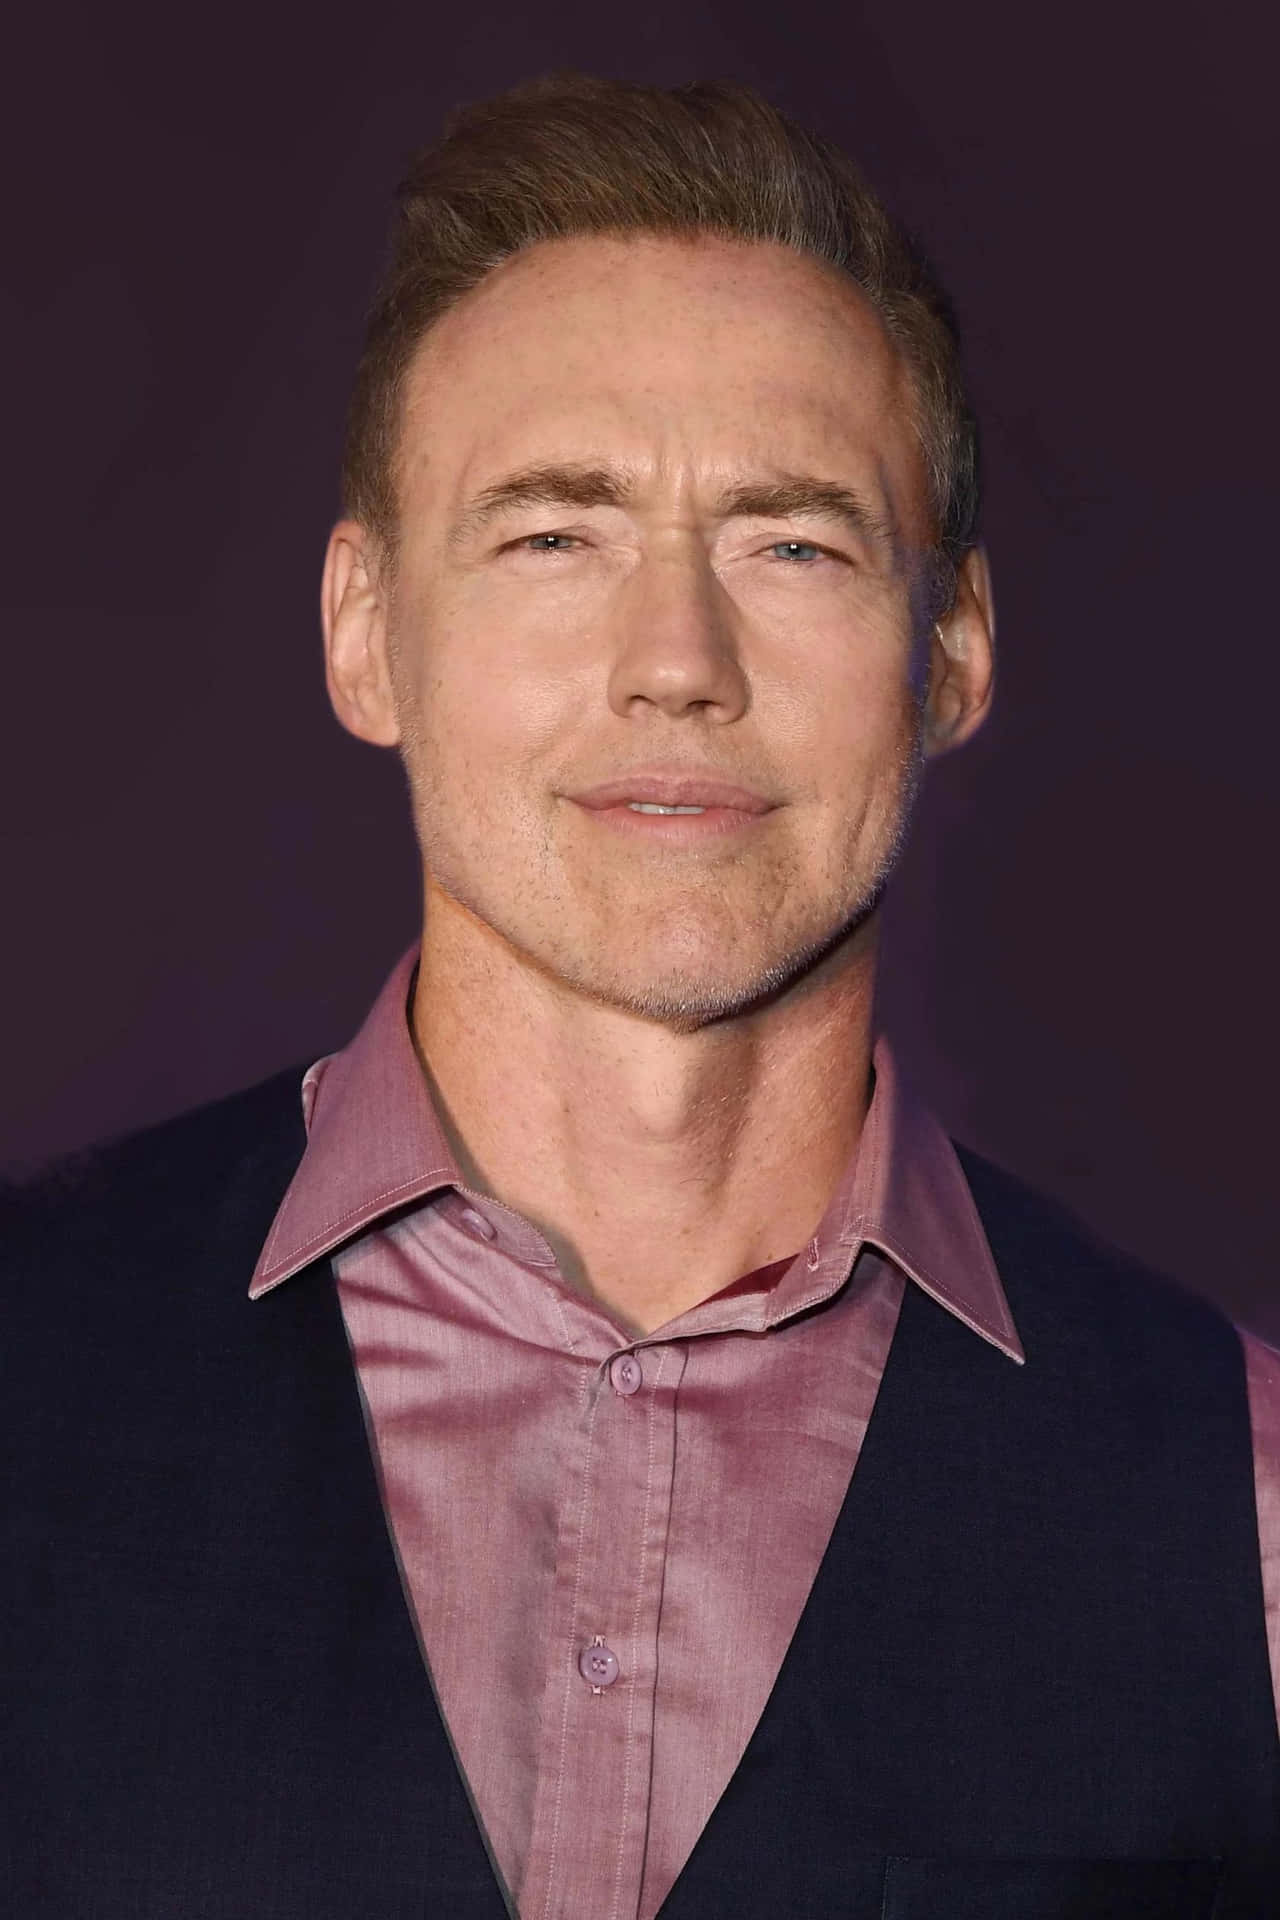 Actor Kevin Durand looks determined while attending a press conference. Wallpaper